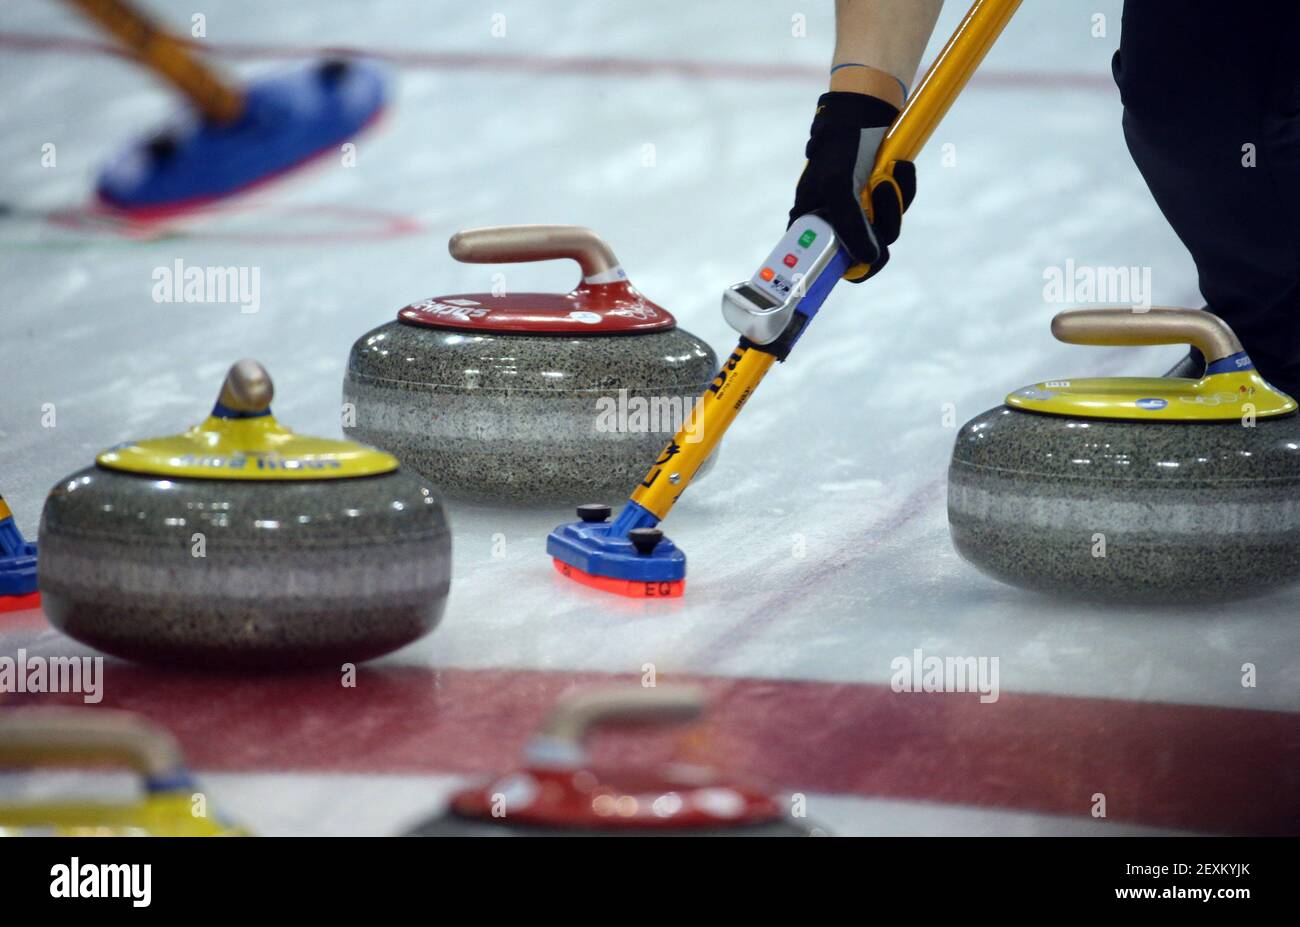 Sweden plays against Switzerland during women's curling semifinals at the Ice Cube Curling Center during the Winter Olympics in Sochi, Russia, Wednesday, Feb. 19, 2014. (Photo by Brian Cassella/Chicago Tribune/MCT/Sipa USA) Stock Photo